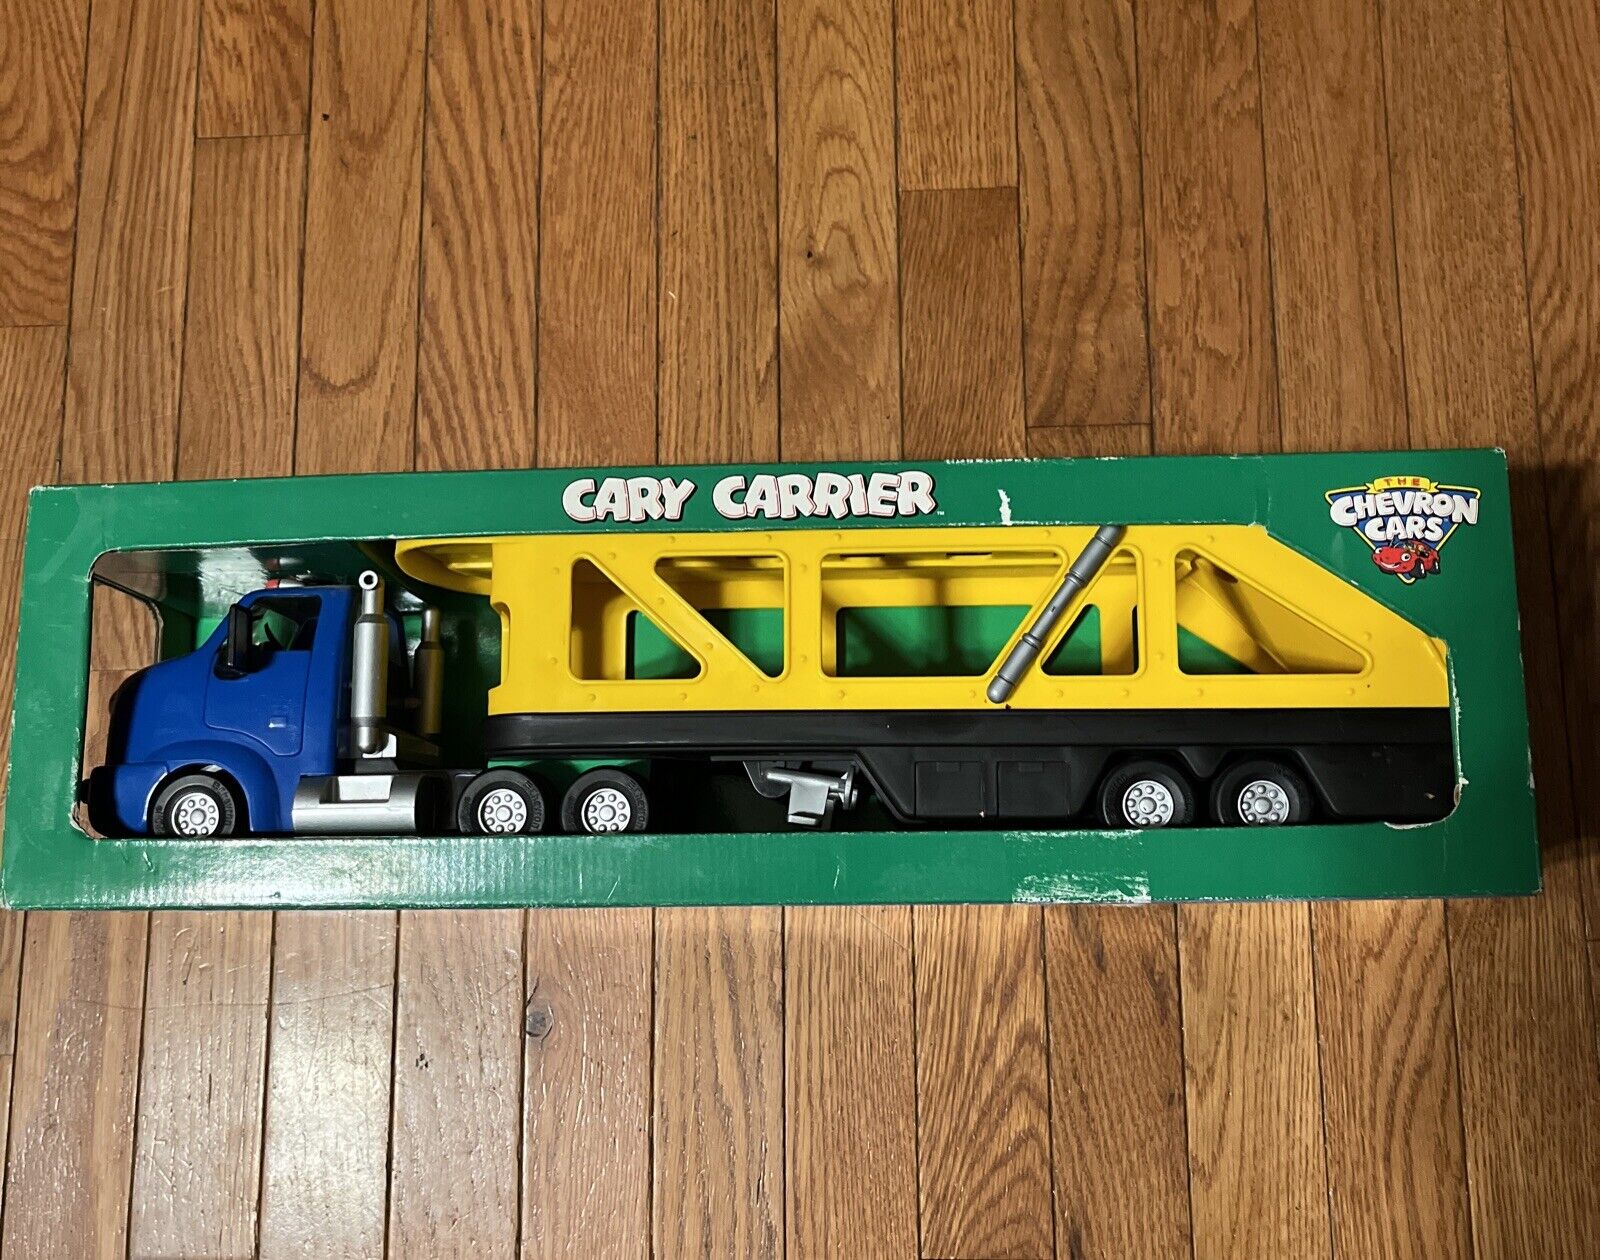 Vintage 1998 The Chevron Cars Cary Carrier 715099299142 NEW